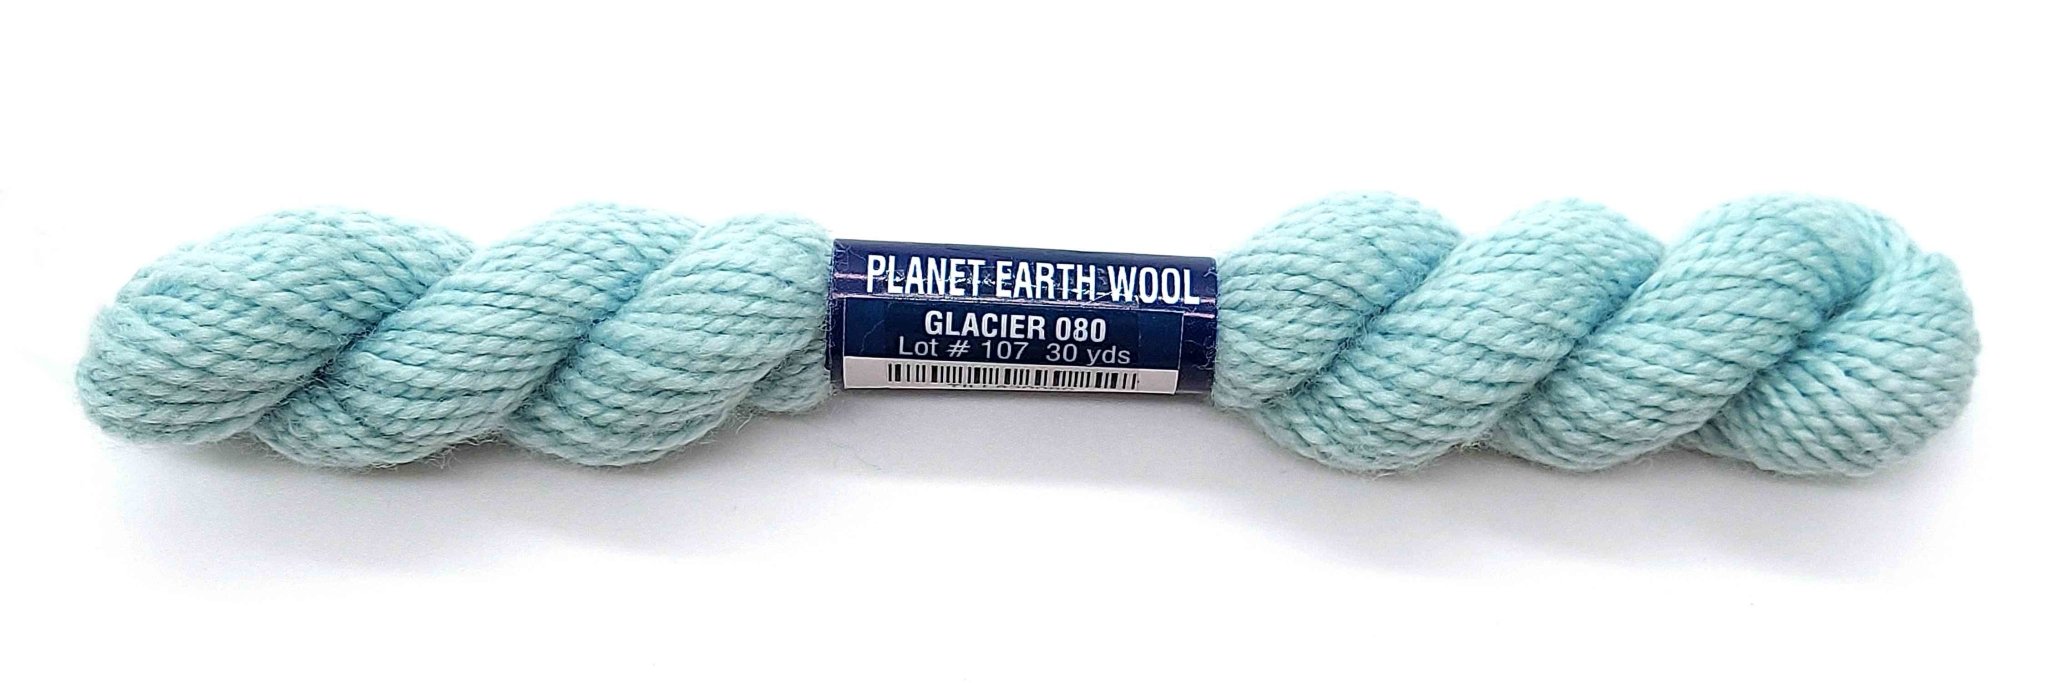 Planet Earth Wool 080 Glacier - The Flying Needles